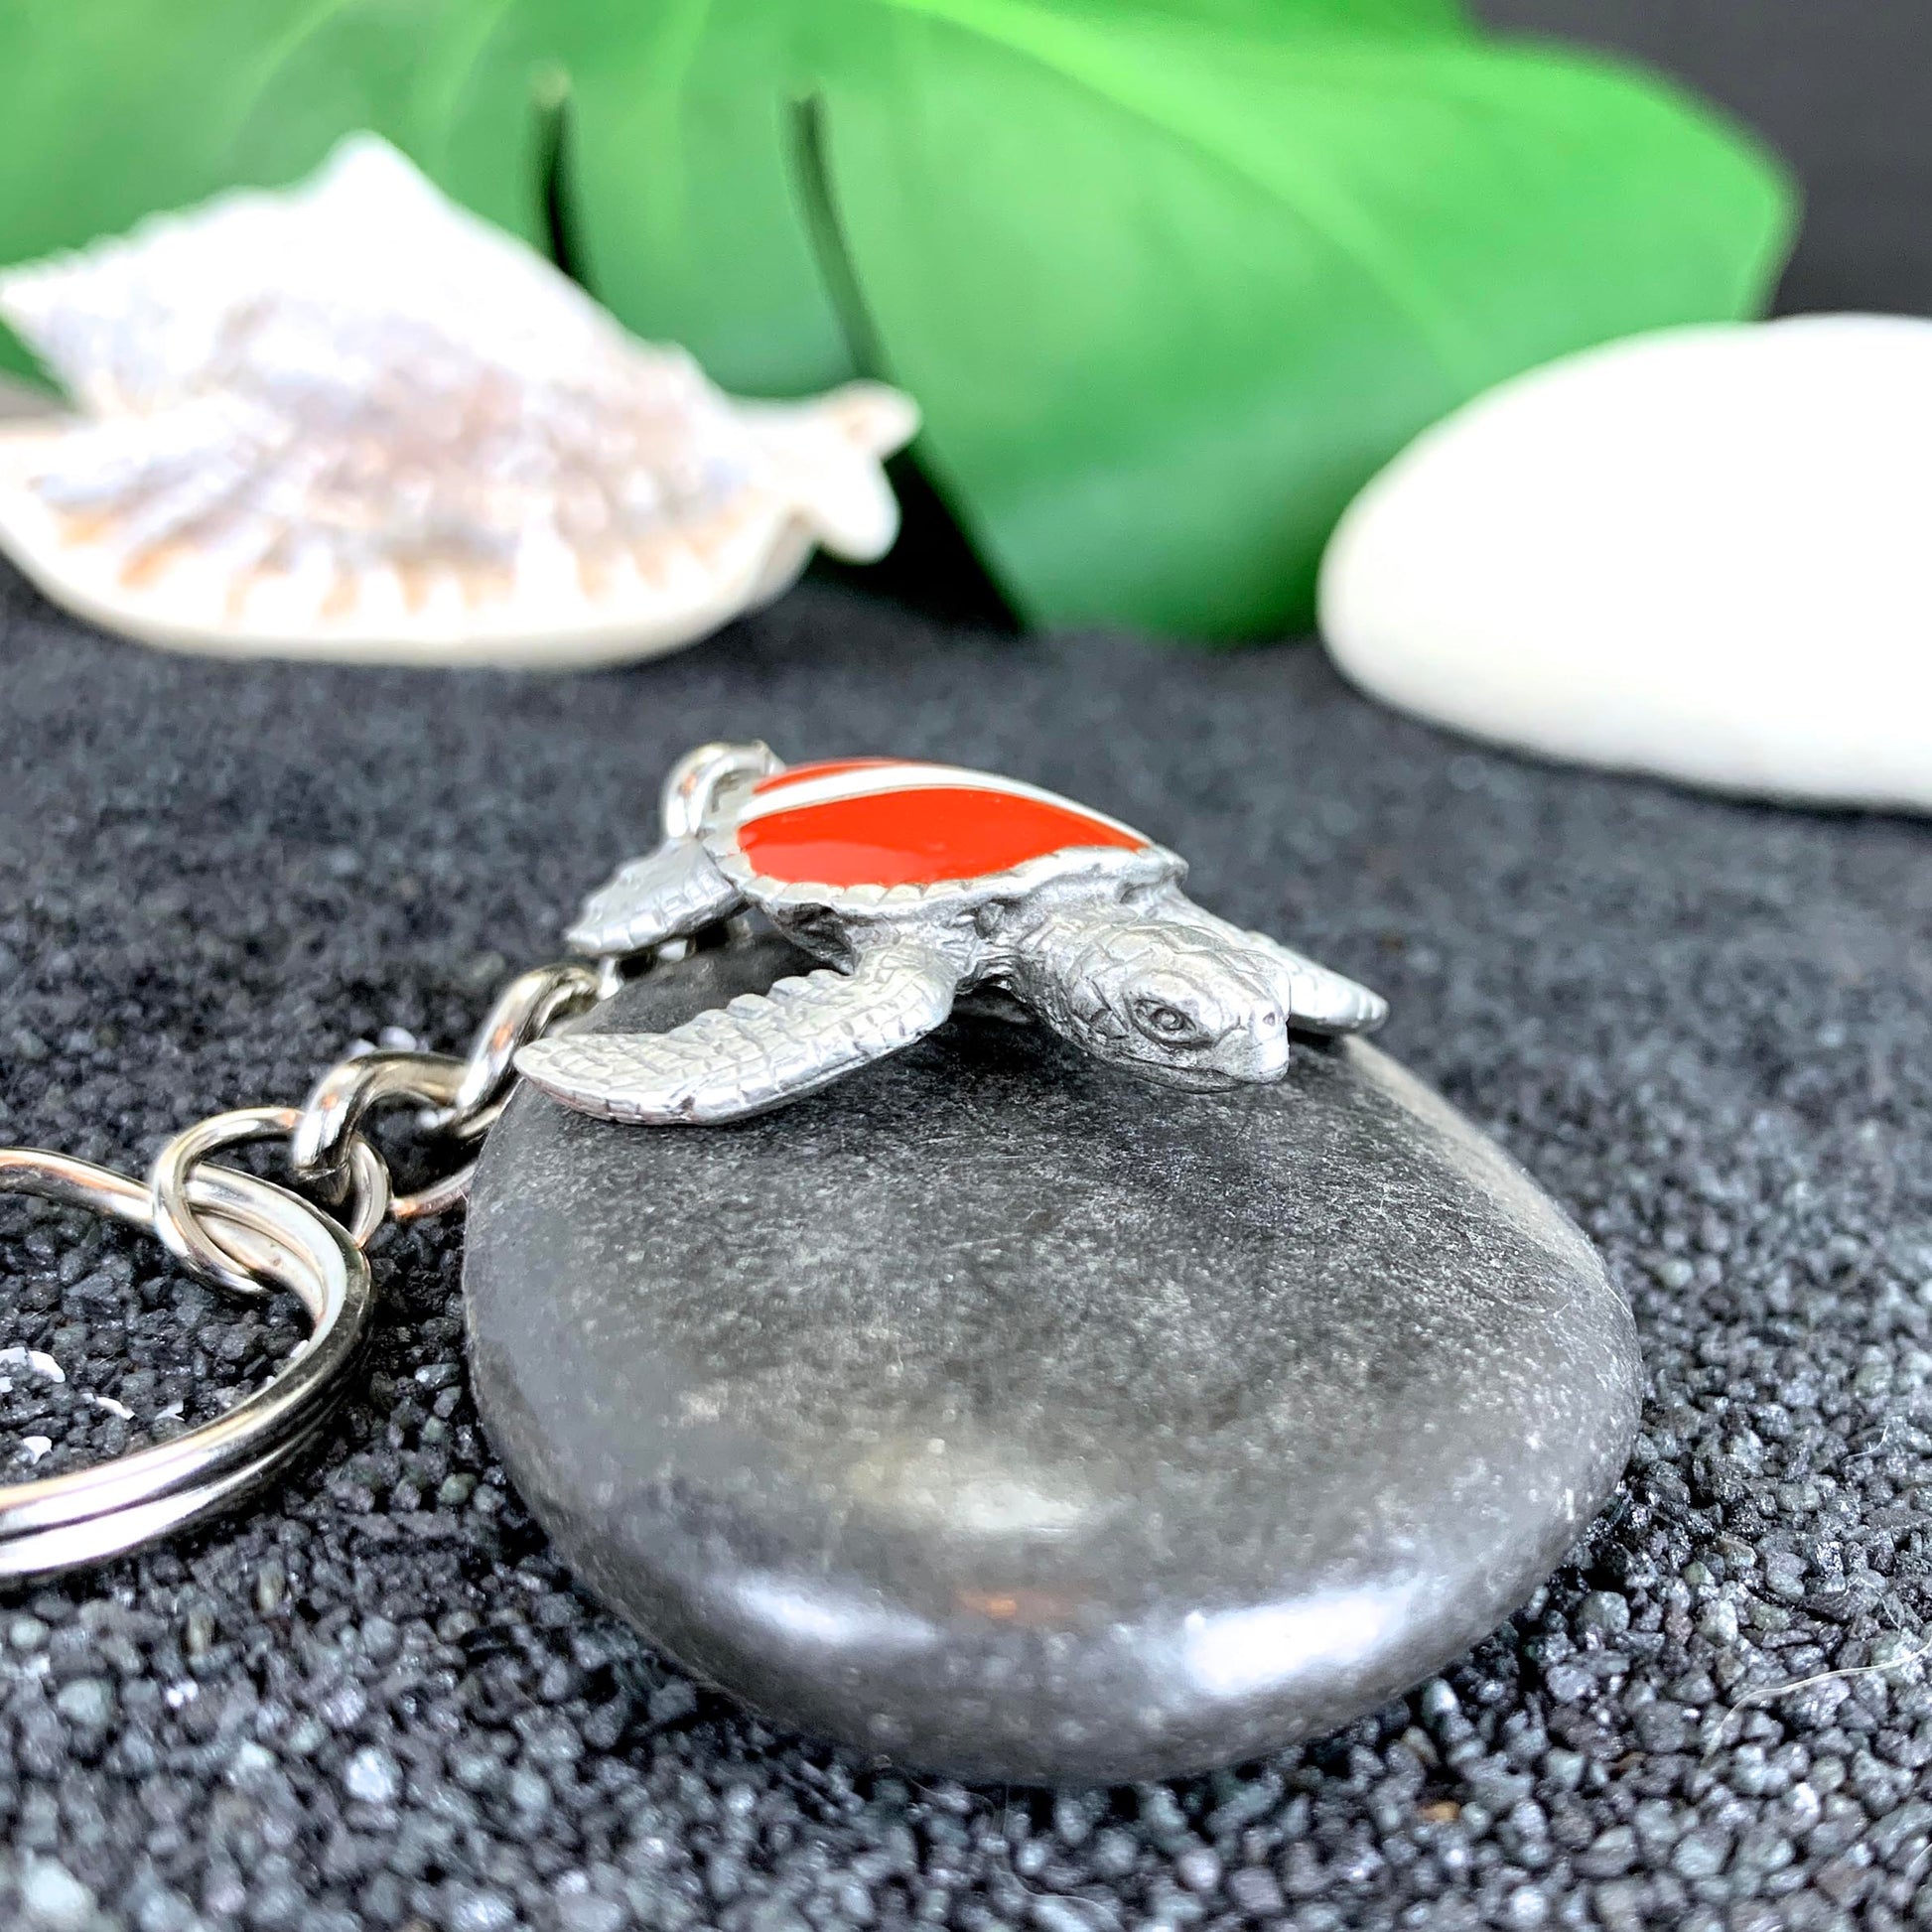 Turtle Keychain with Dive Flag for Men and Women- Gift for Turtle Lovers, Scuba Diving Turtle Keyring, Sea Turtle Key Fob, Gifts for Scuba - The Tool Store